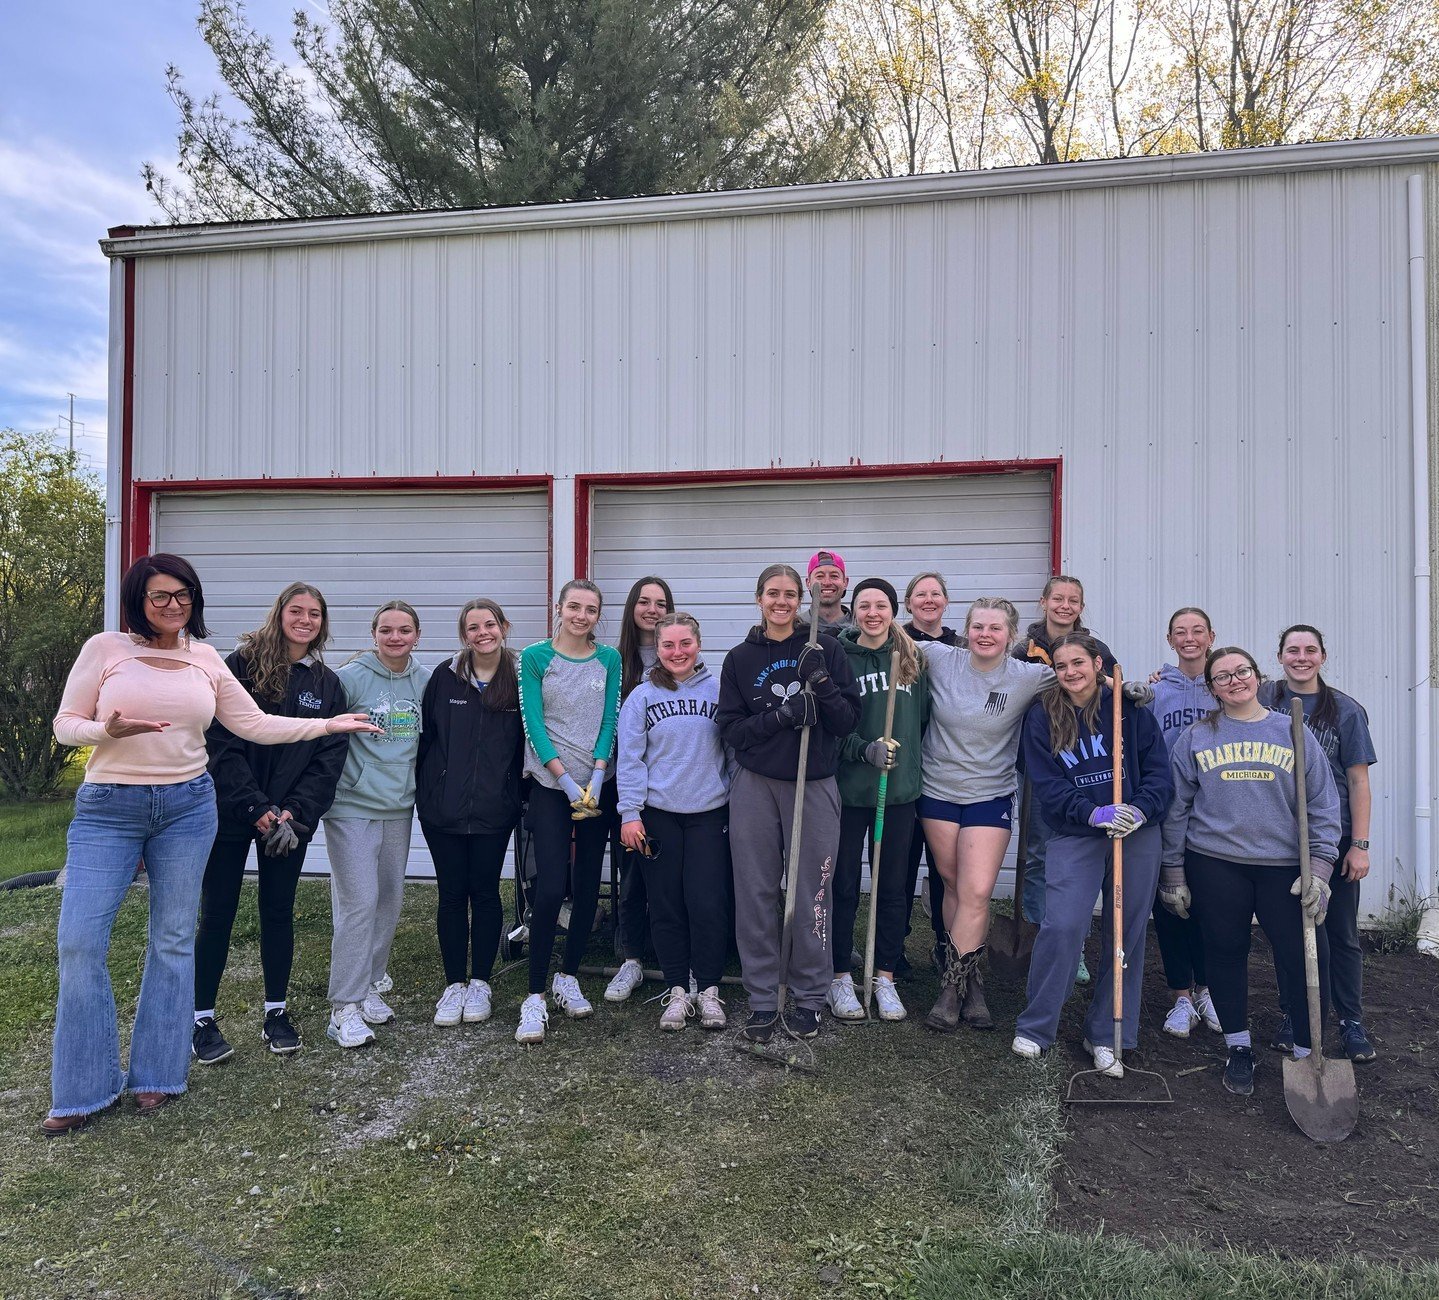 A special thank you to the Lakewood Park Girls Tennis Team for volunteering their time to do a special service project for Hearten House. 🎾💙

What an amazing group of young women! We are beyond grateful and excited to expand our porch area.